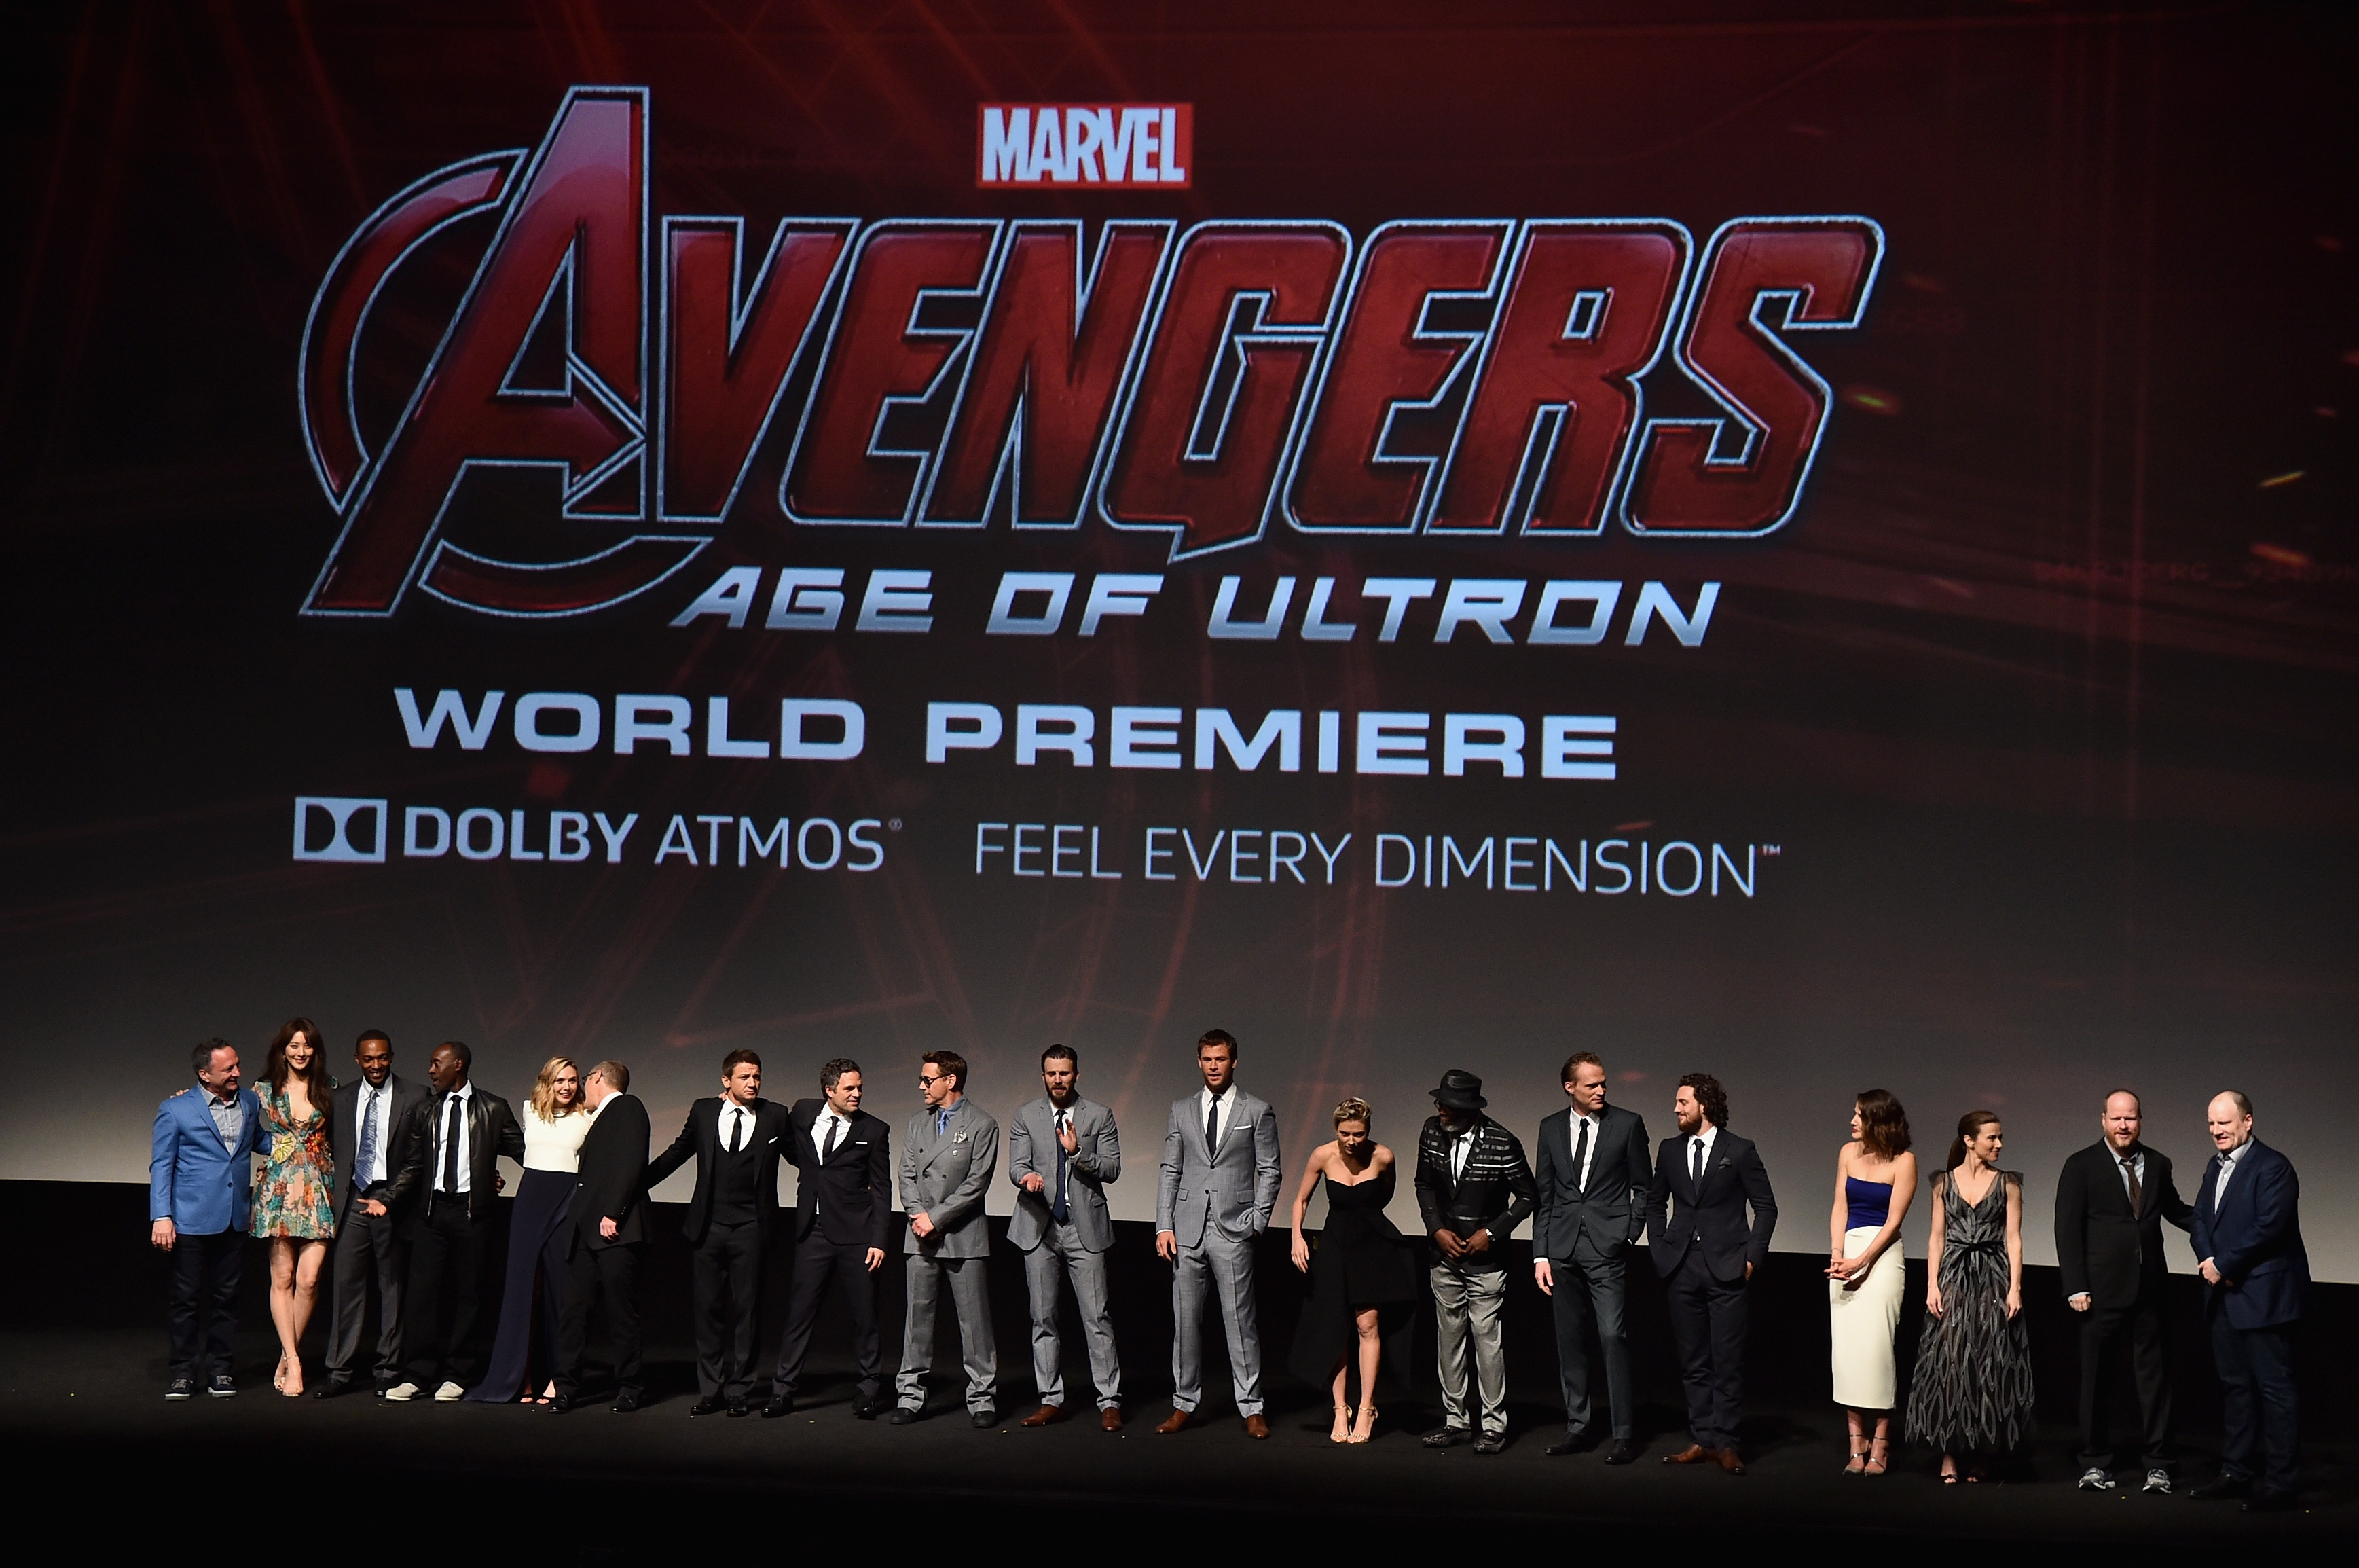 Marvel’s The Avengers: Age of Ultron World Premiere Red Carpet Photos